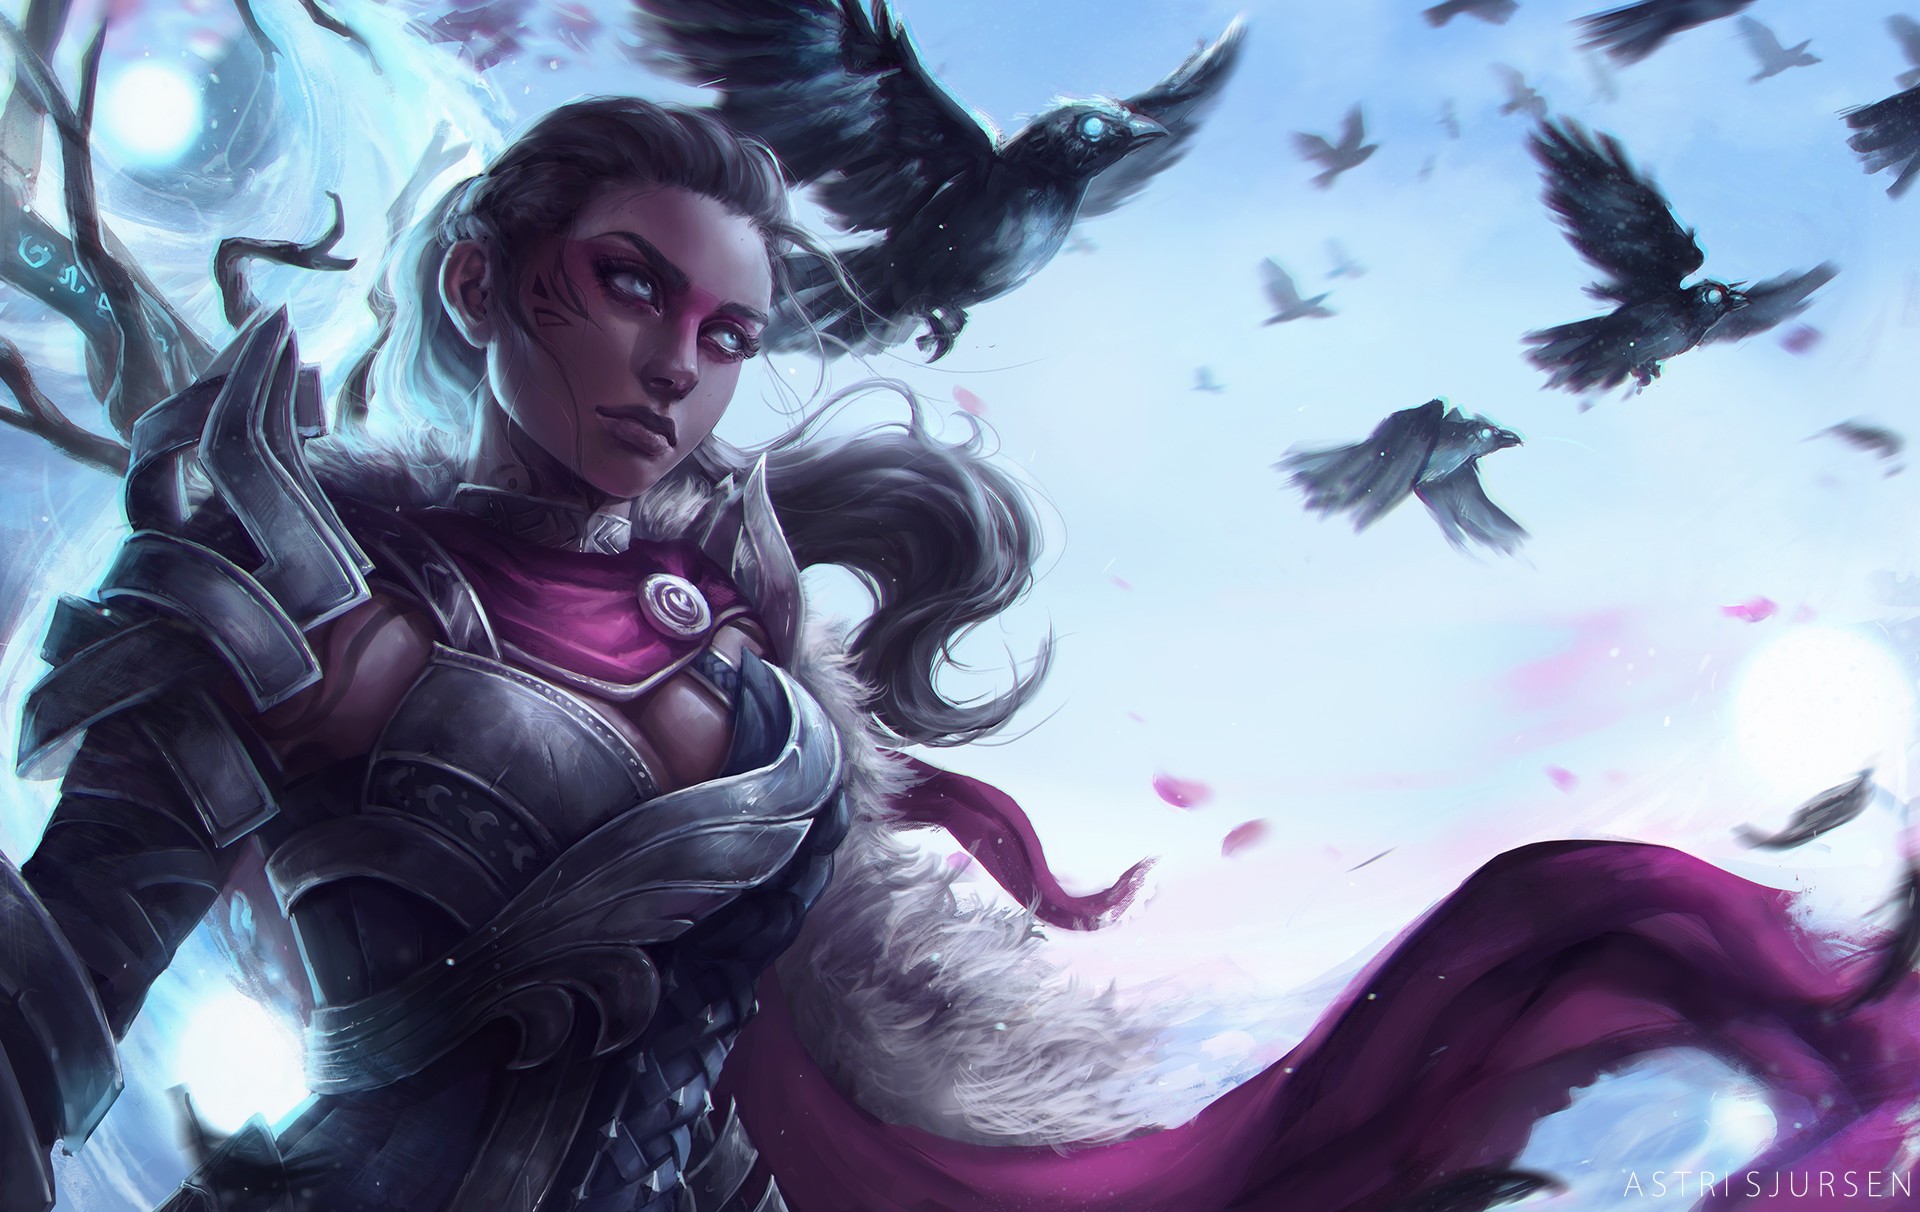 General 1920x1212 fantasy art warrior armor Guild Wars 2 figure-hugging armor cleavage low-angle birds ponytail hair blowing in the wind